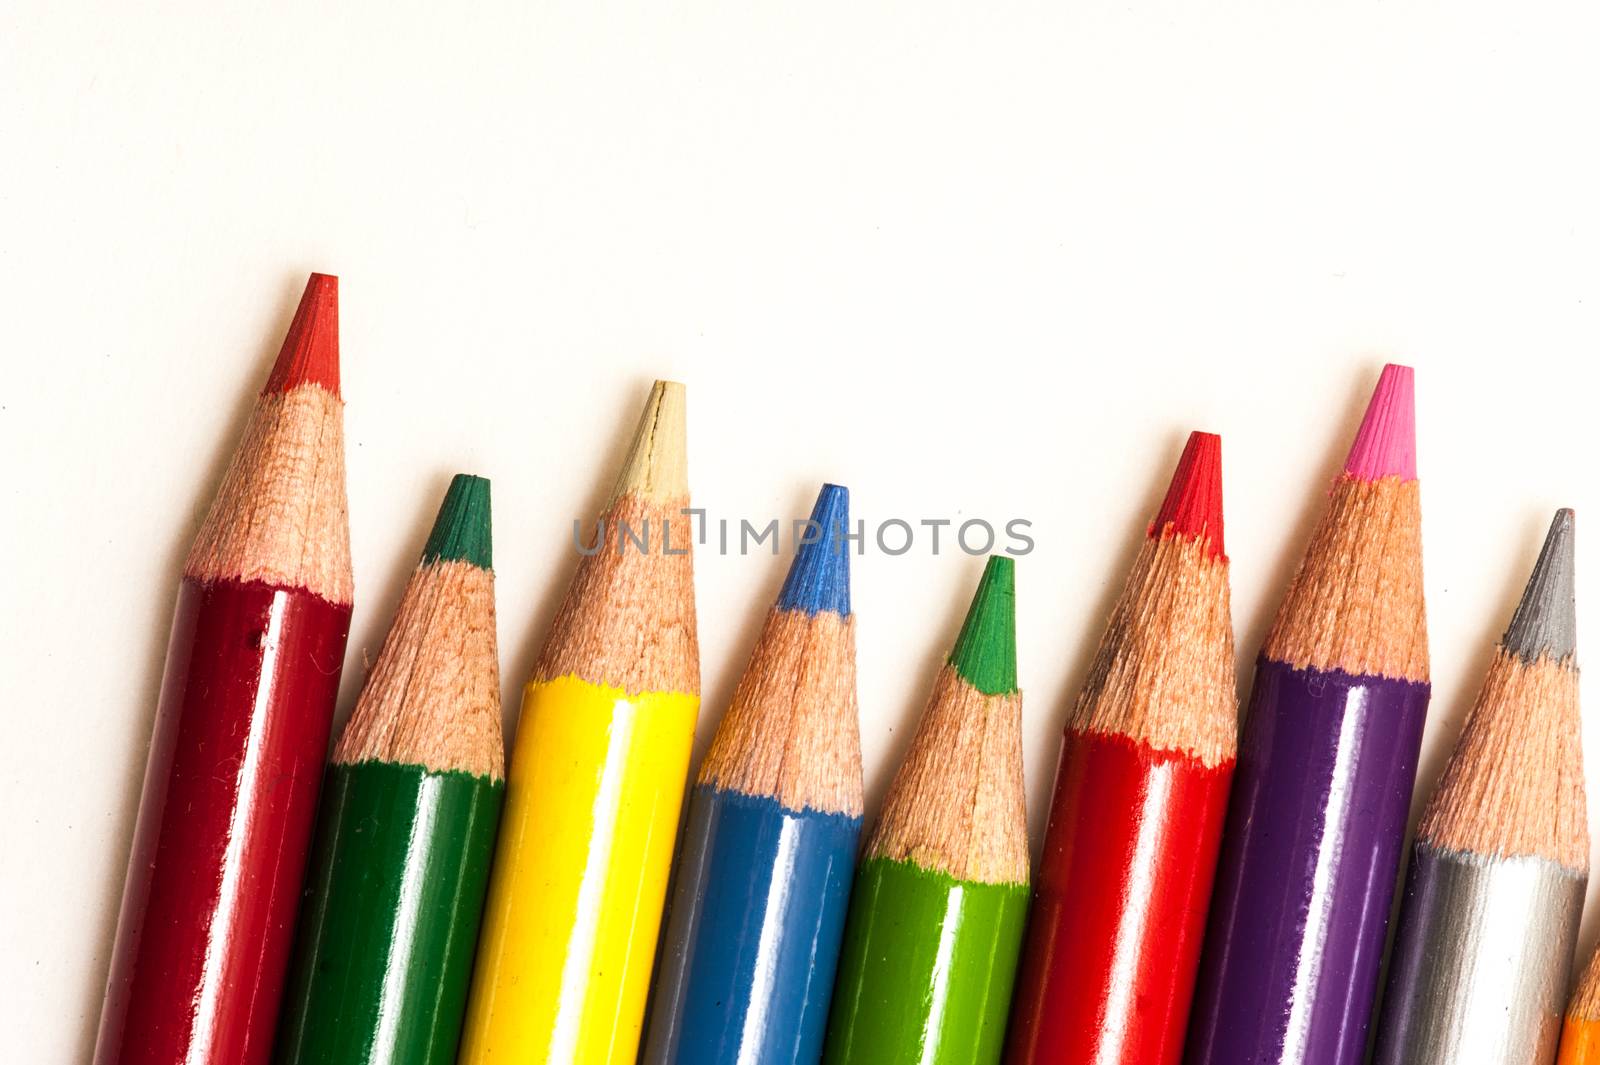 Many Colored pencils on a white background.